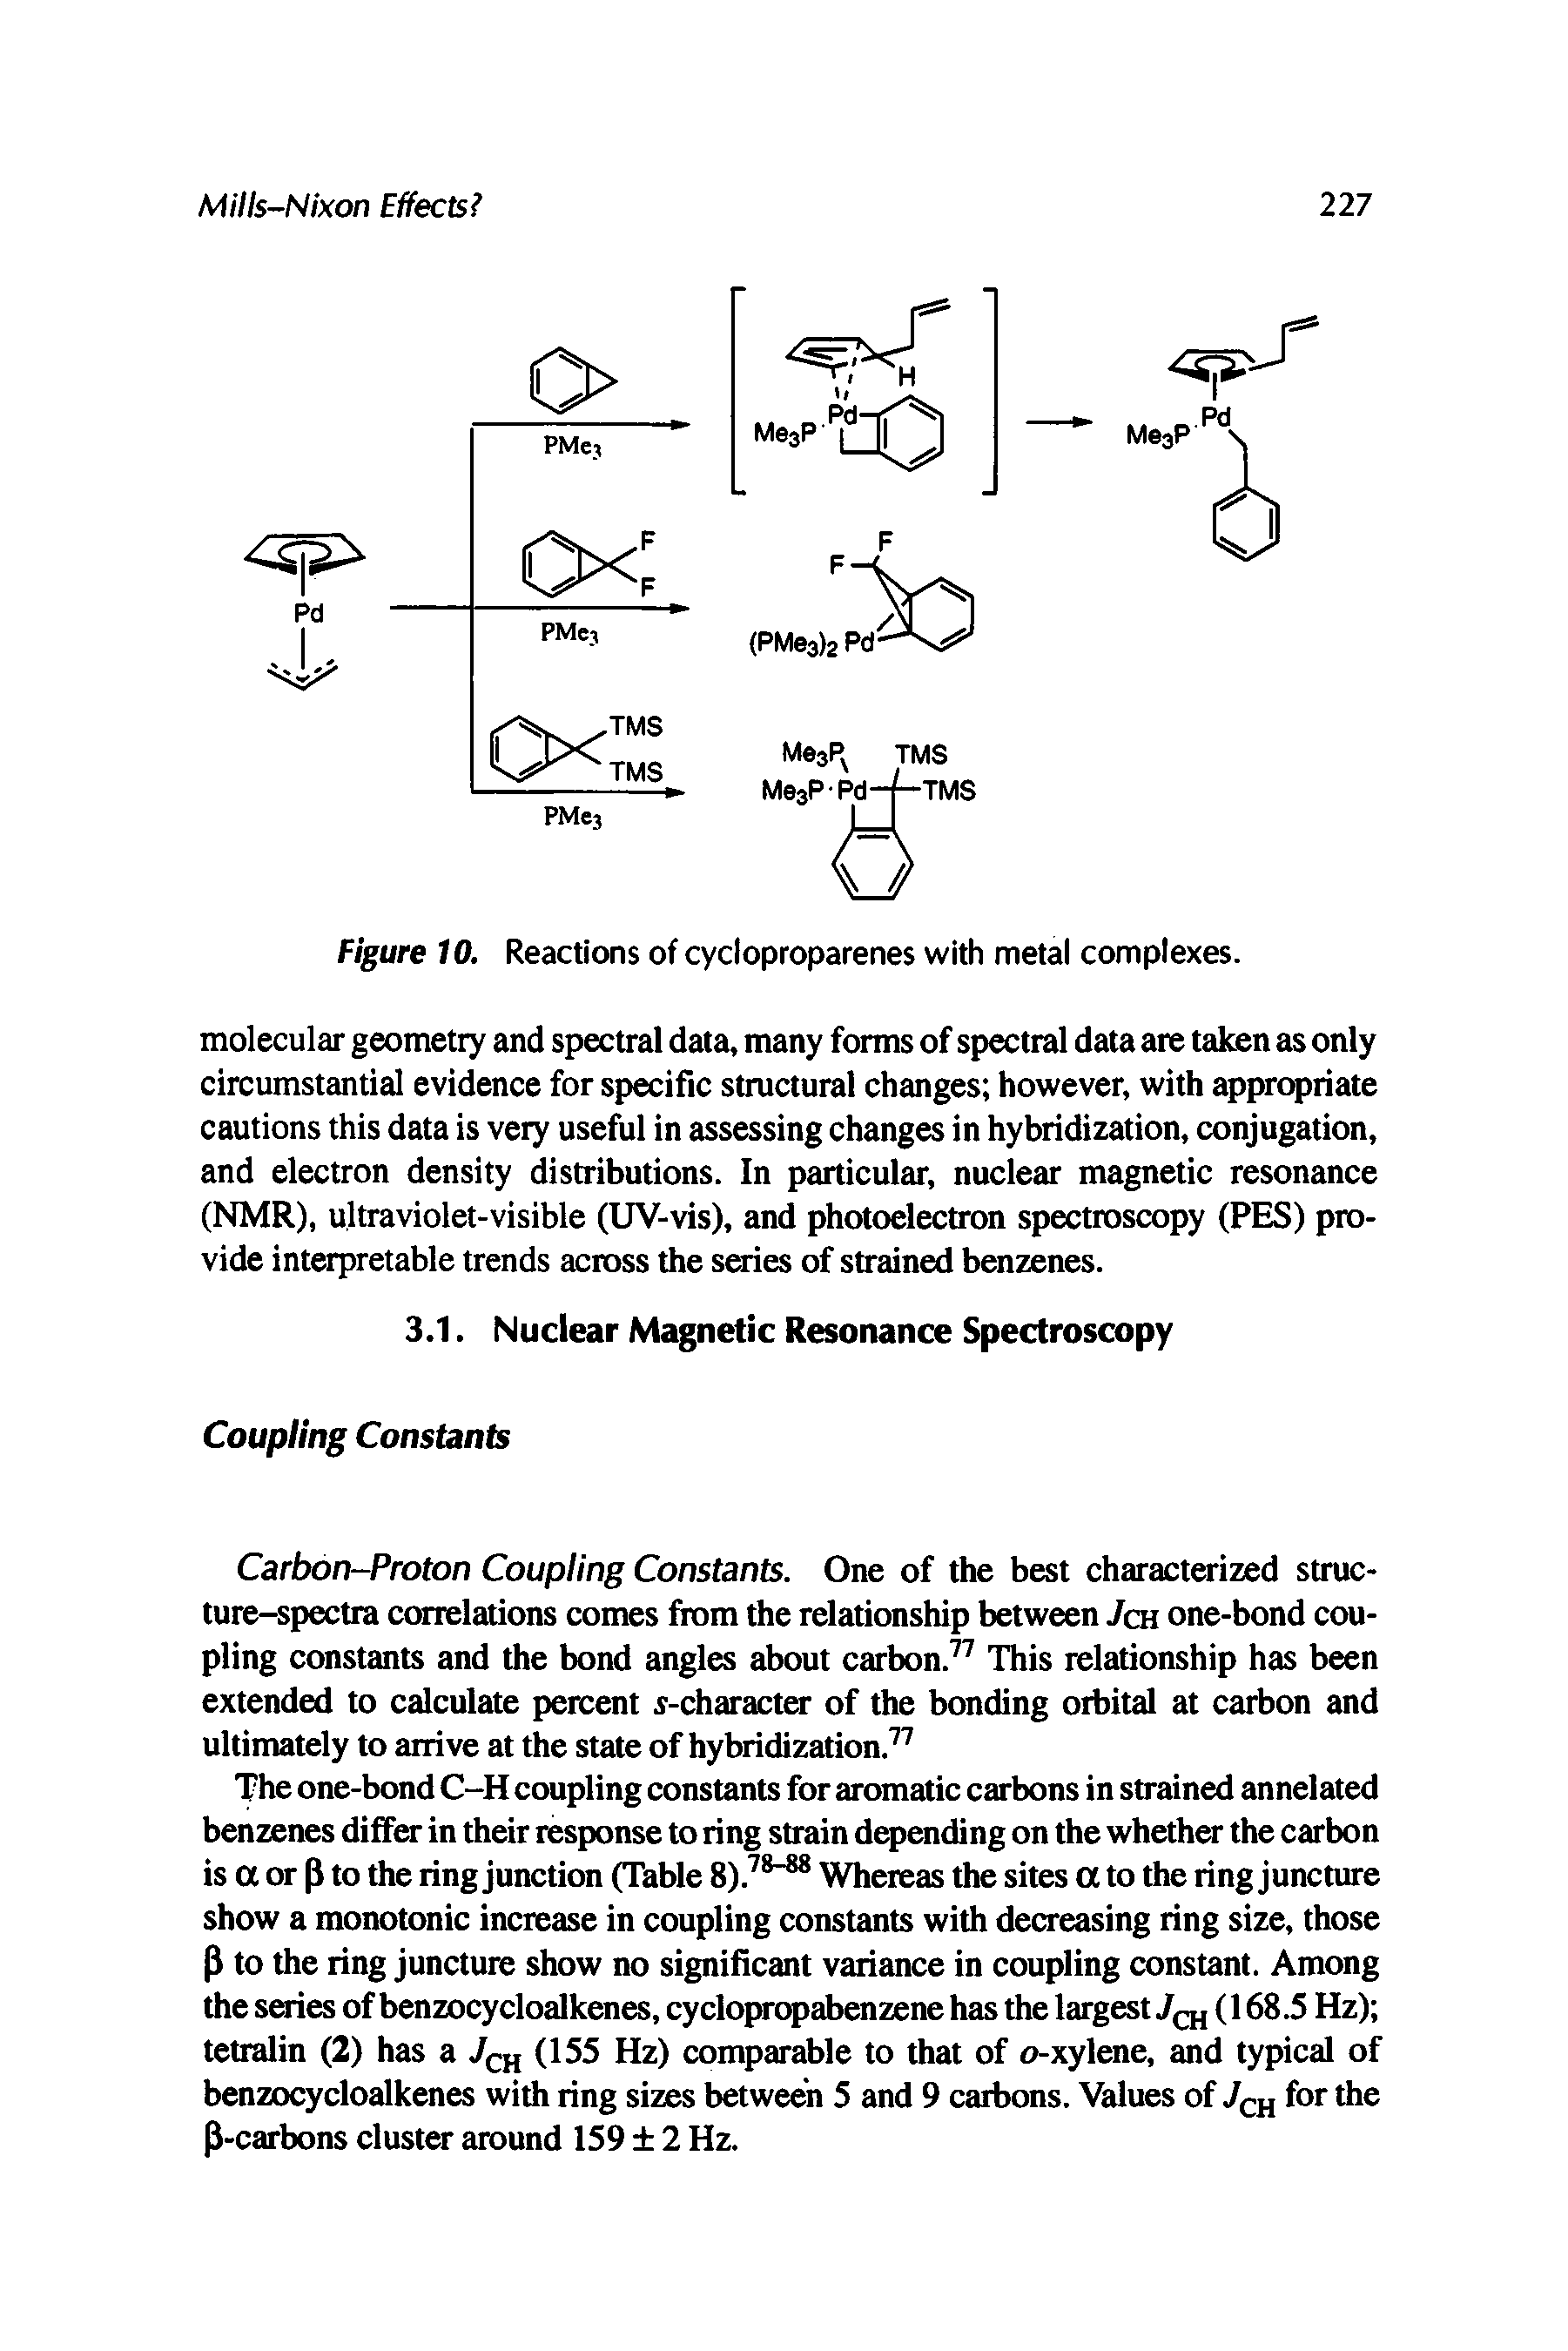 Figure 10. Reactions of cycloproparenes with metal complexes.